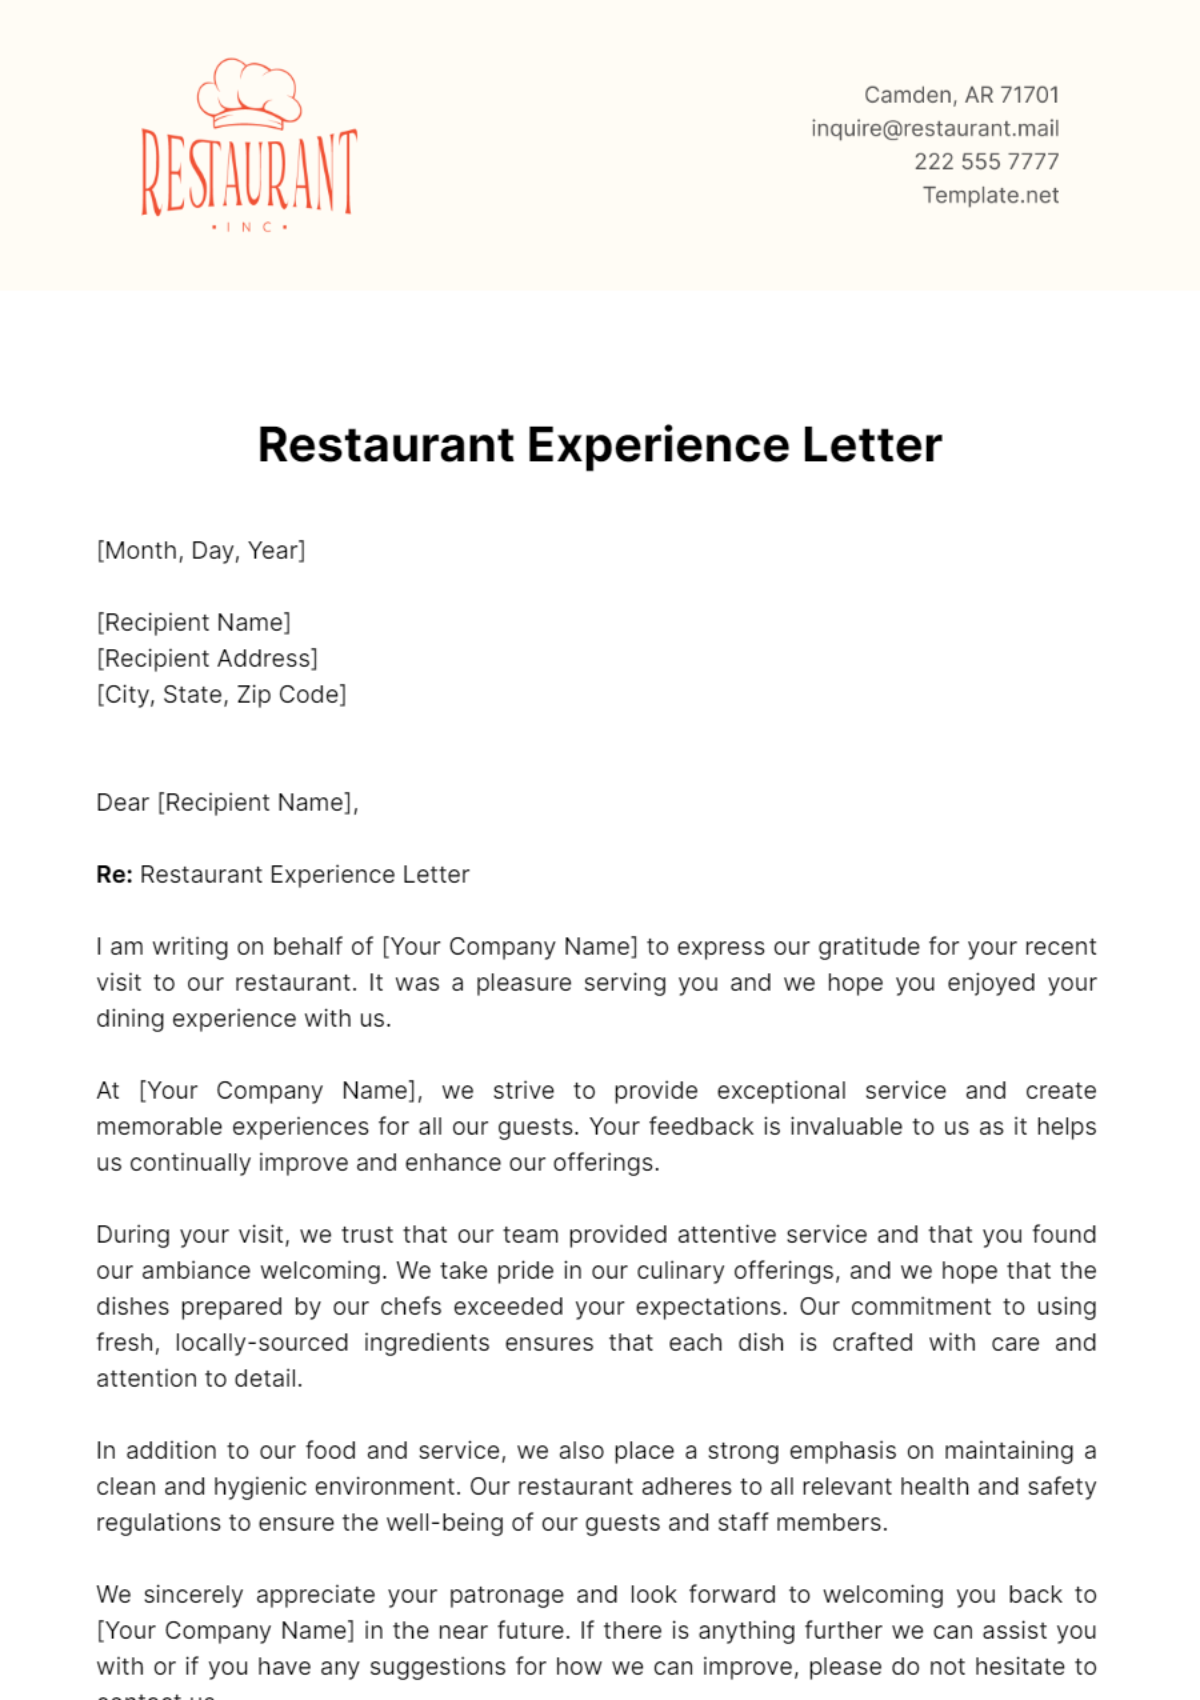 Restaurant Experience Letter Template